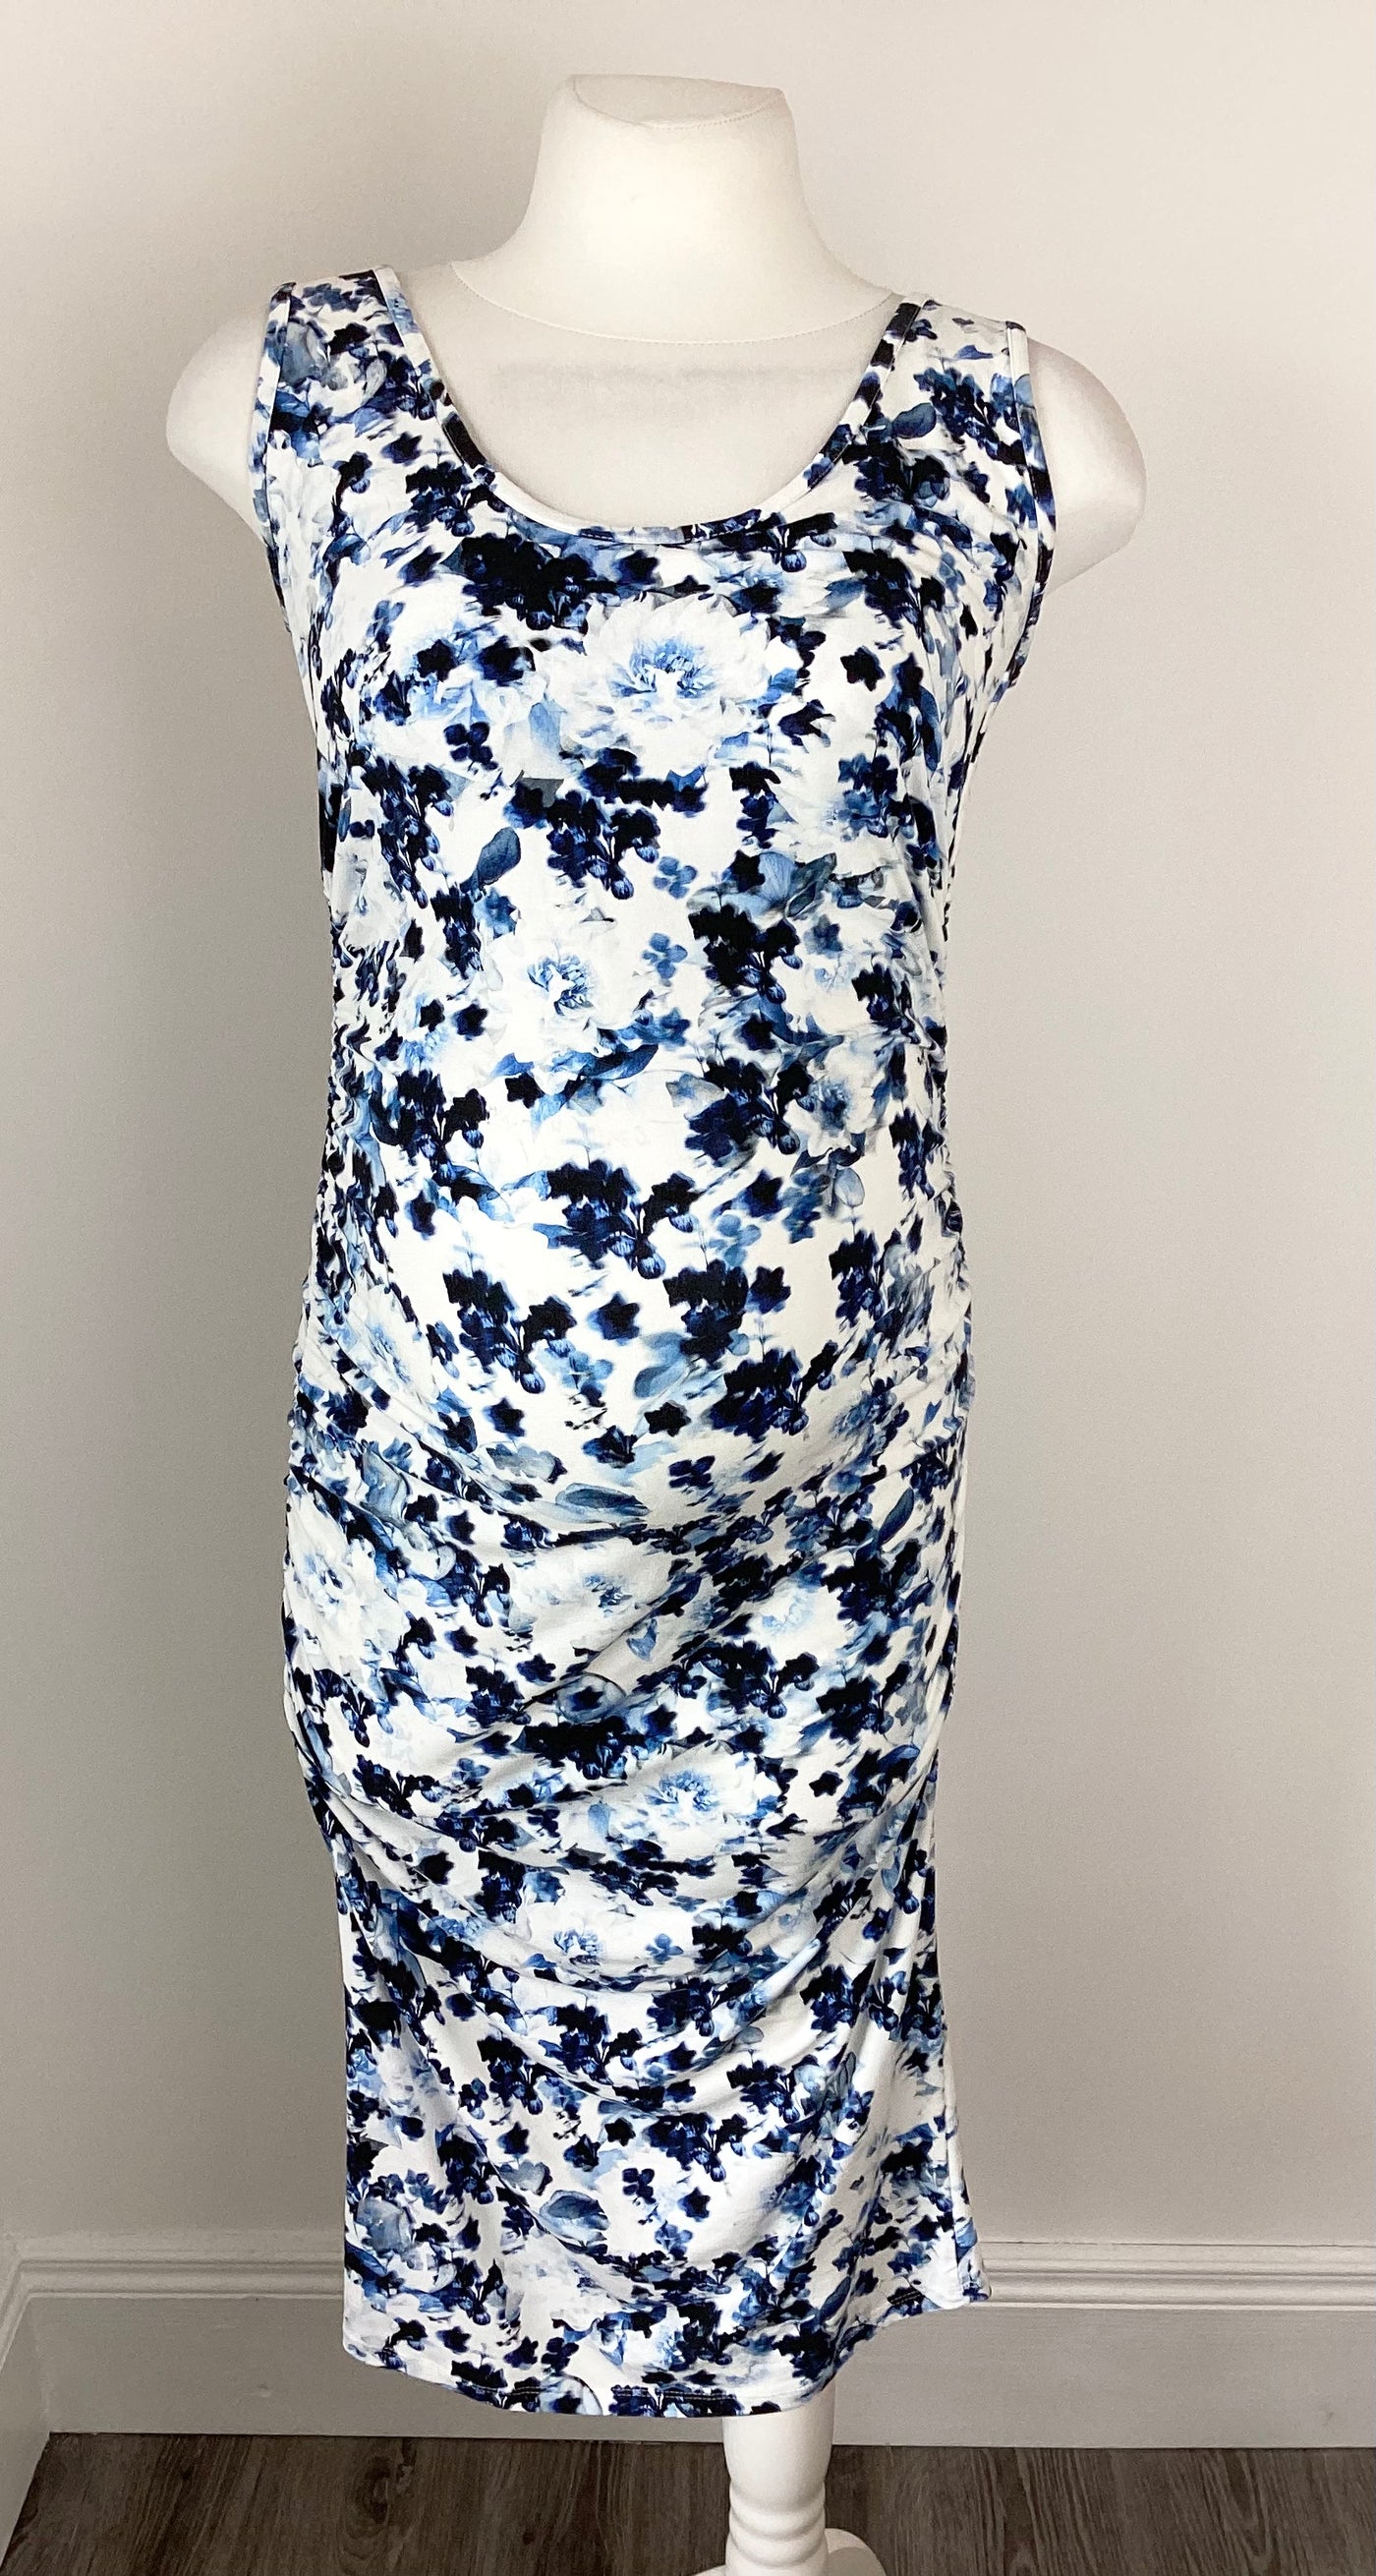 Isabella Oliver White & Blue floral sleeveless dress - Size 3 (Approx UK 14)